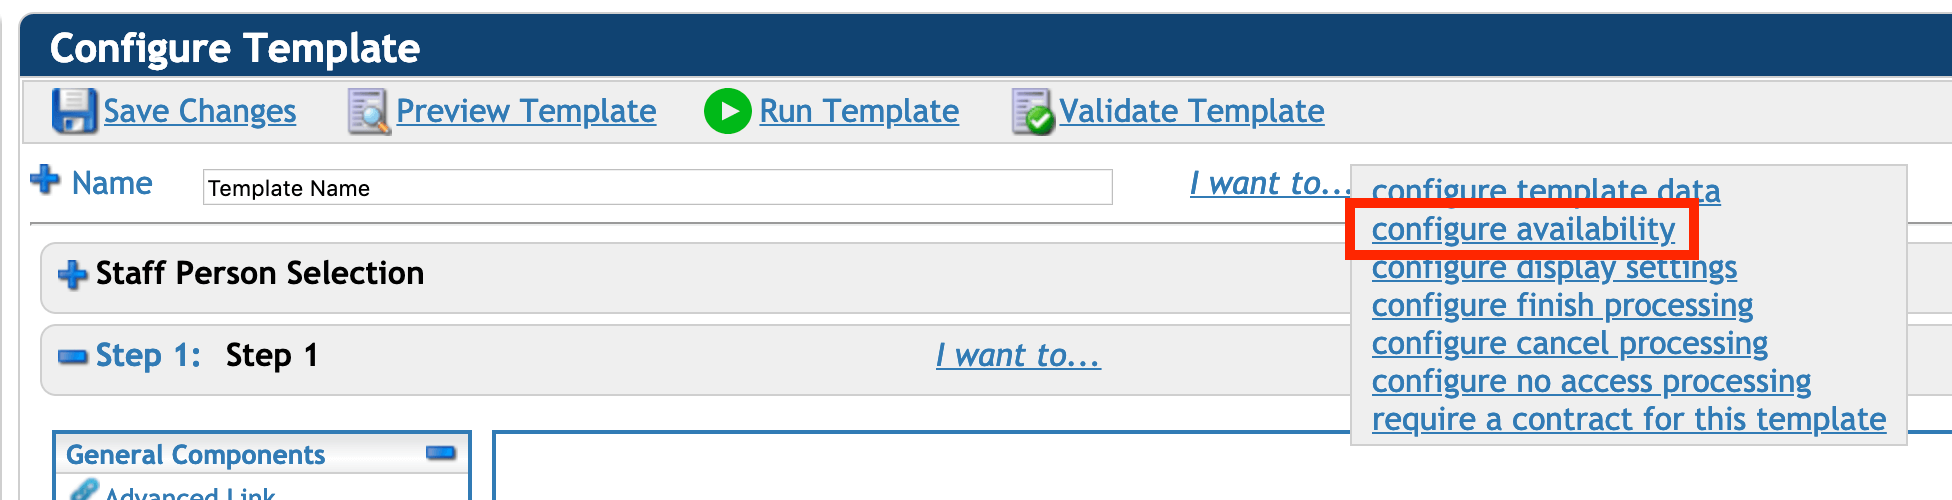 Configure availability from template